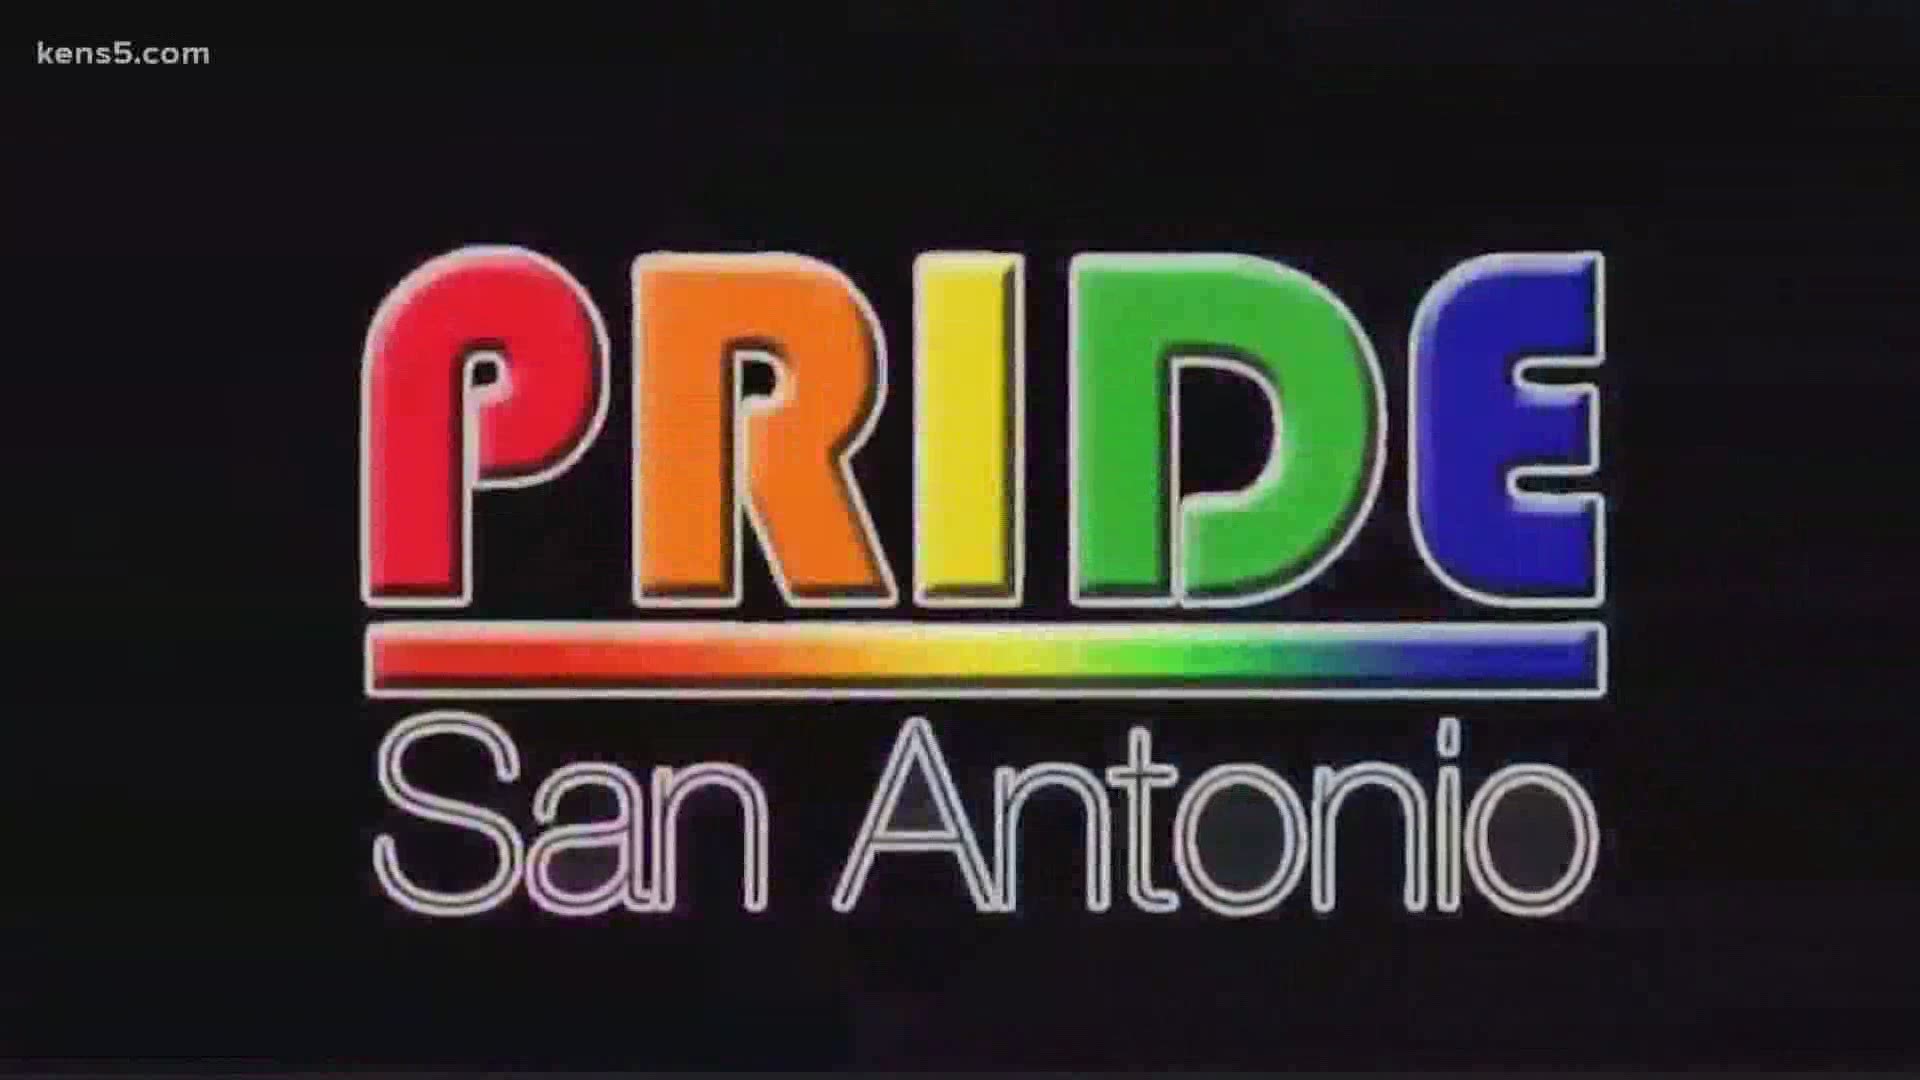 The parade recognizes the accomplishments of the LGBTQ community in San Antonio and raises money for eight local charities.